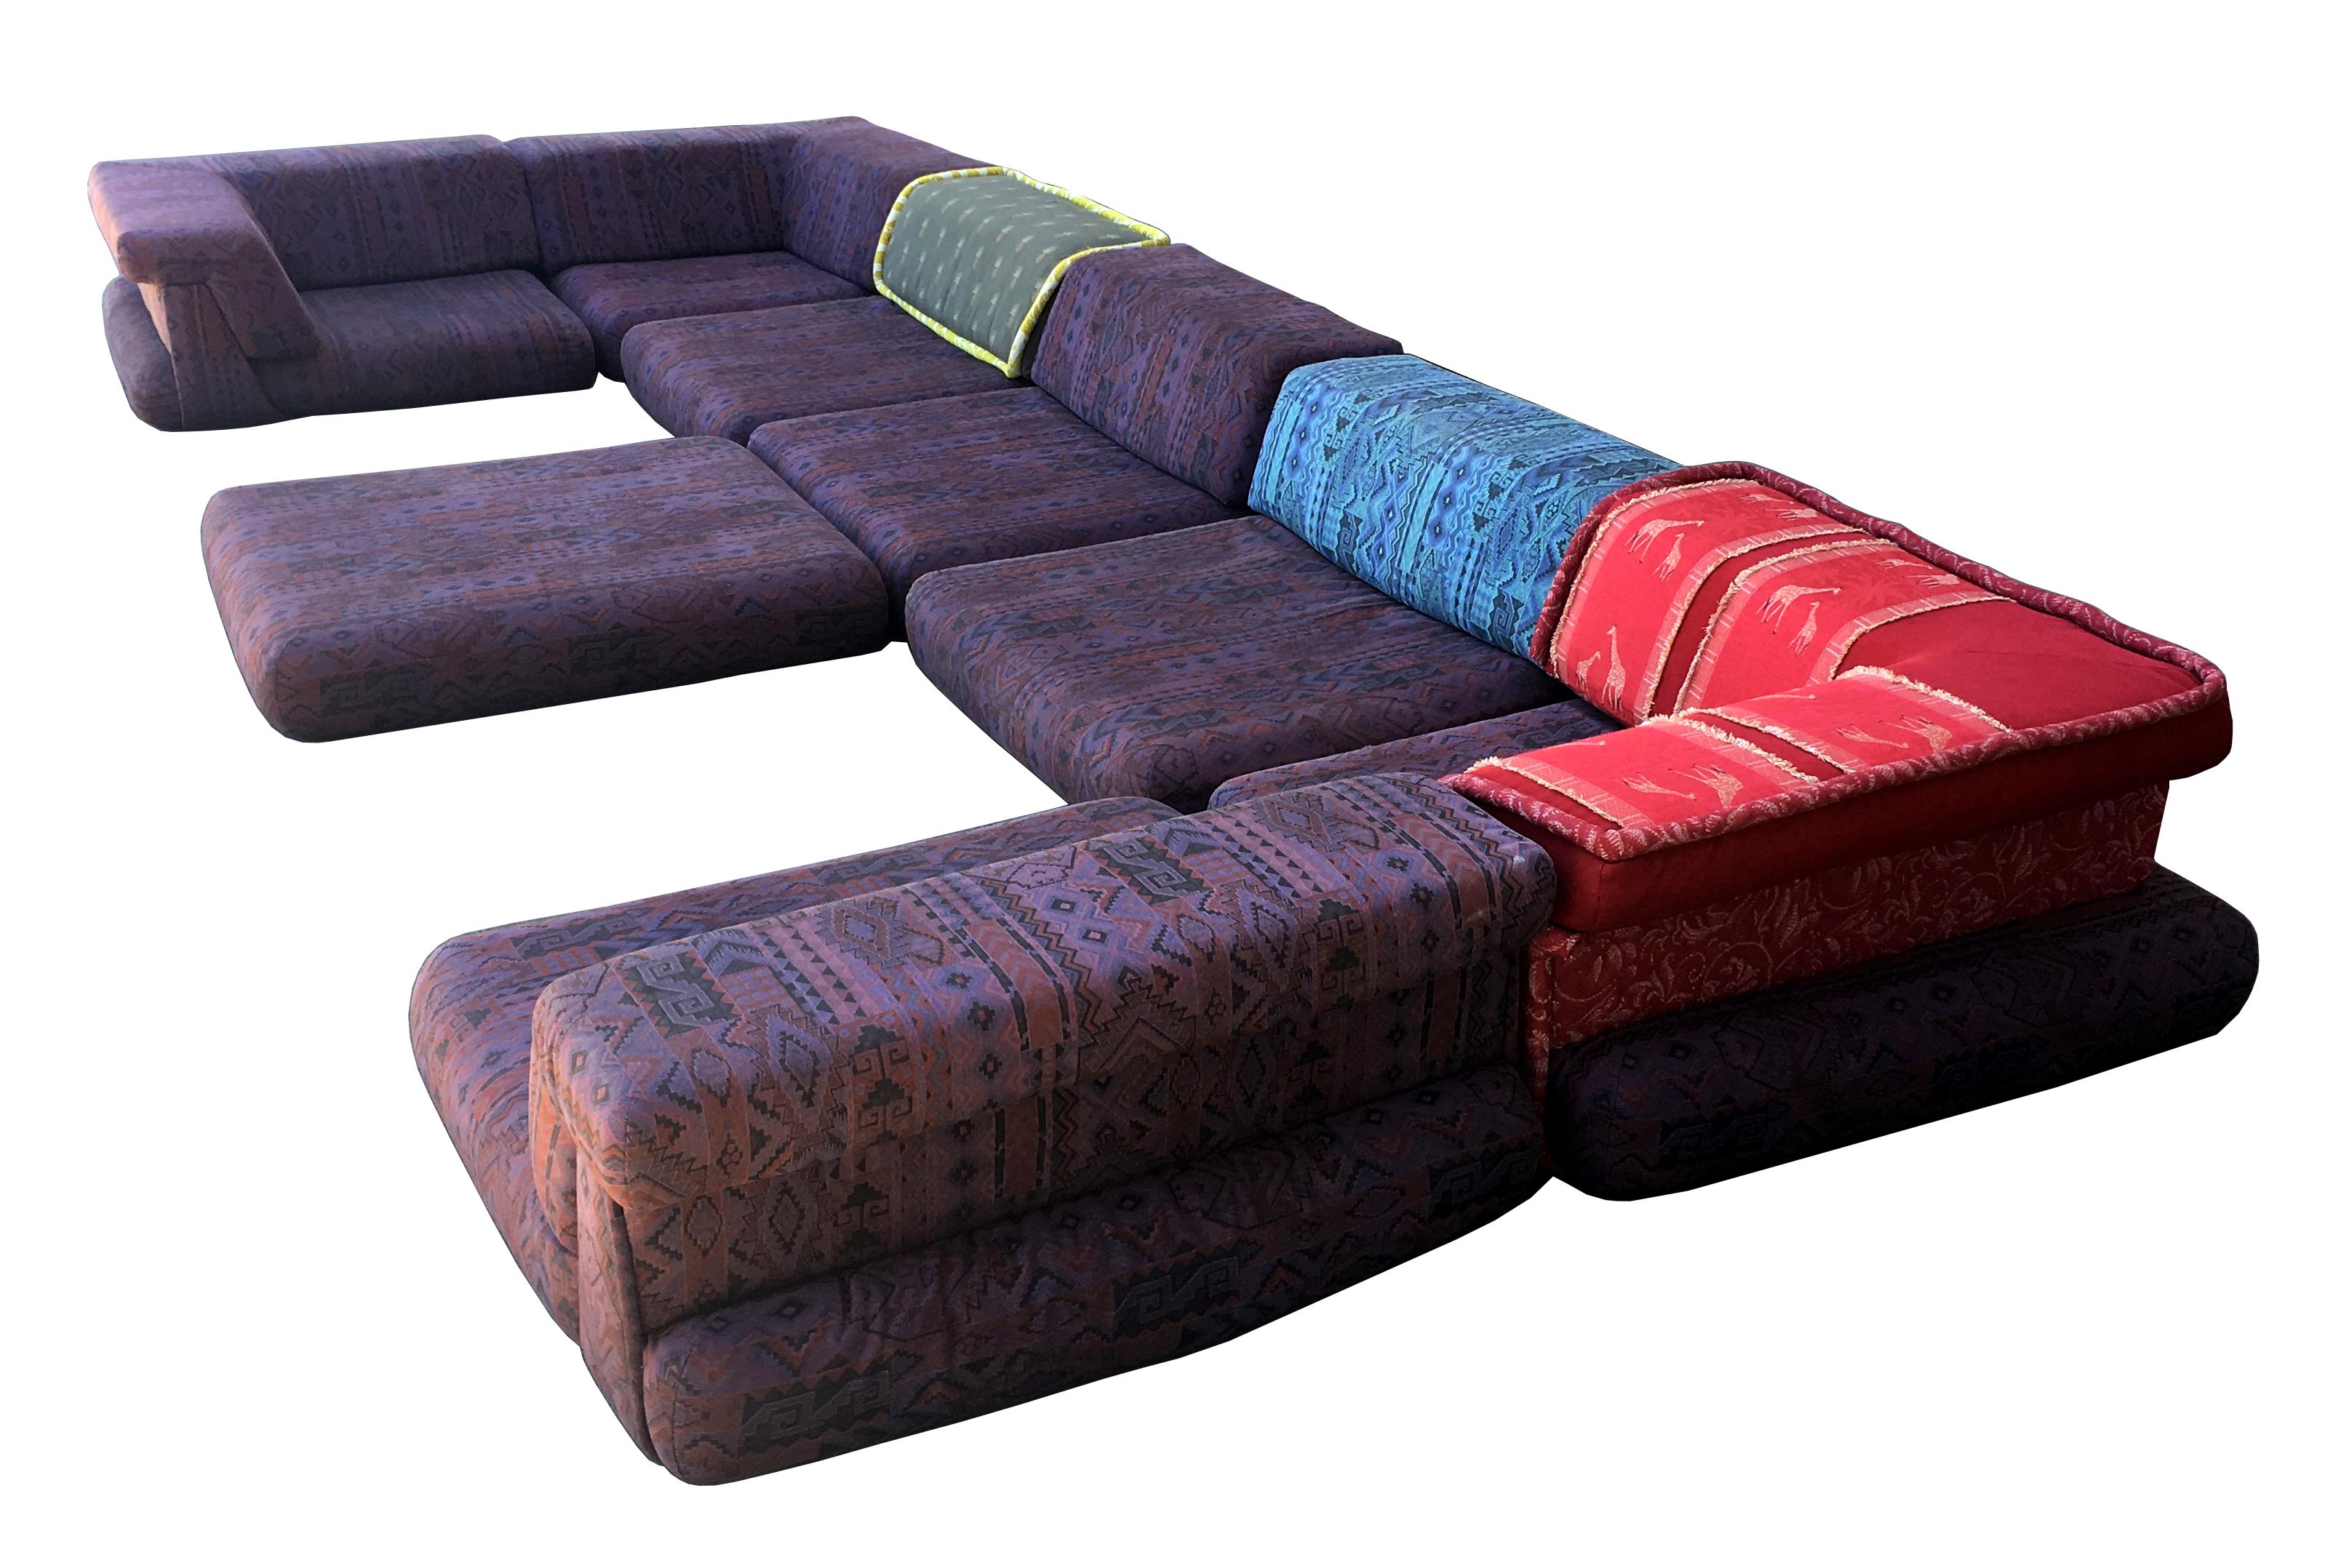 French Iconic Mah Jong Modular Sectional Sofa by Roche Bobois, 15 Pieces